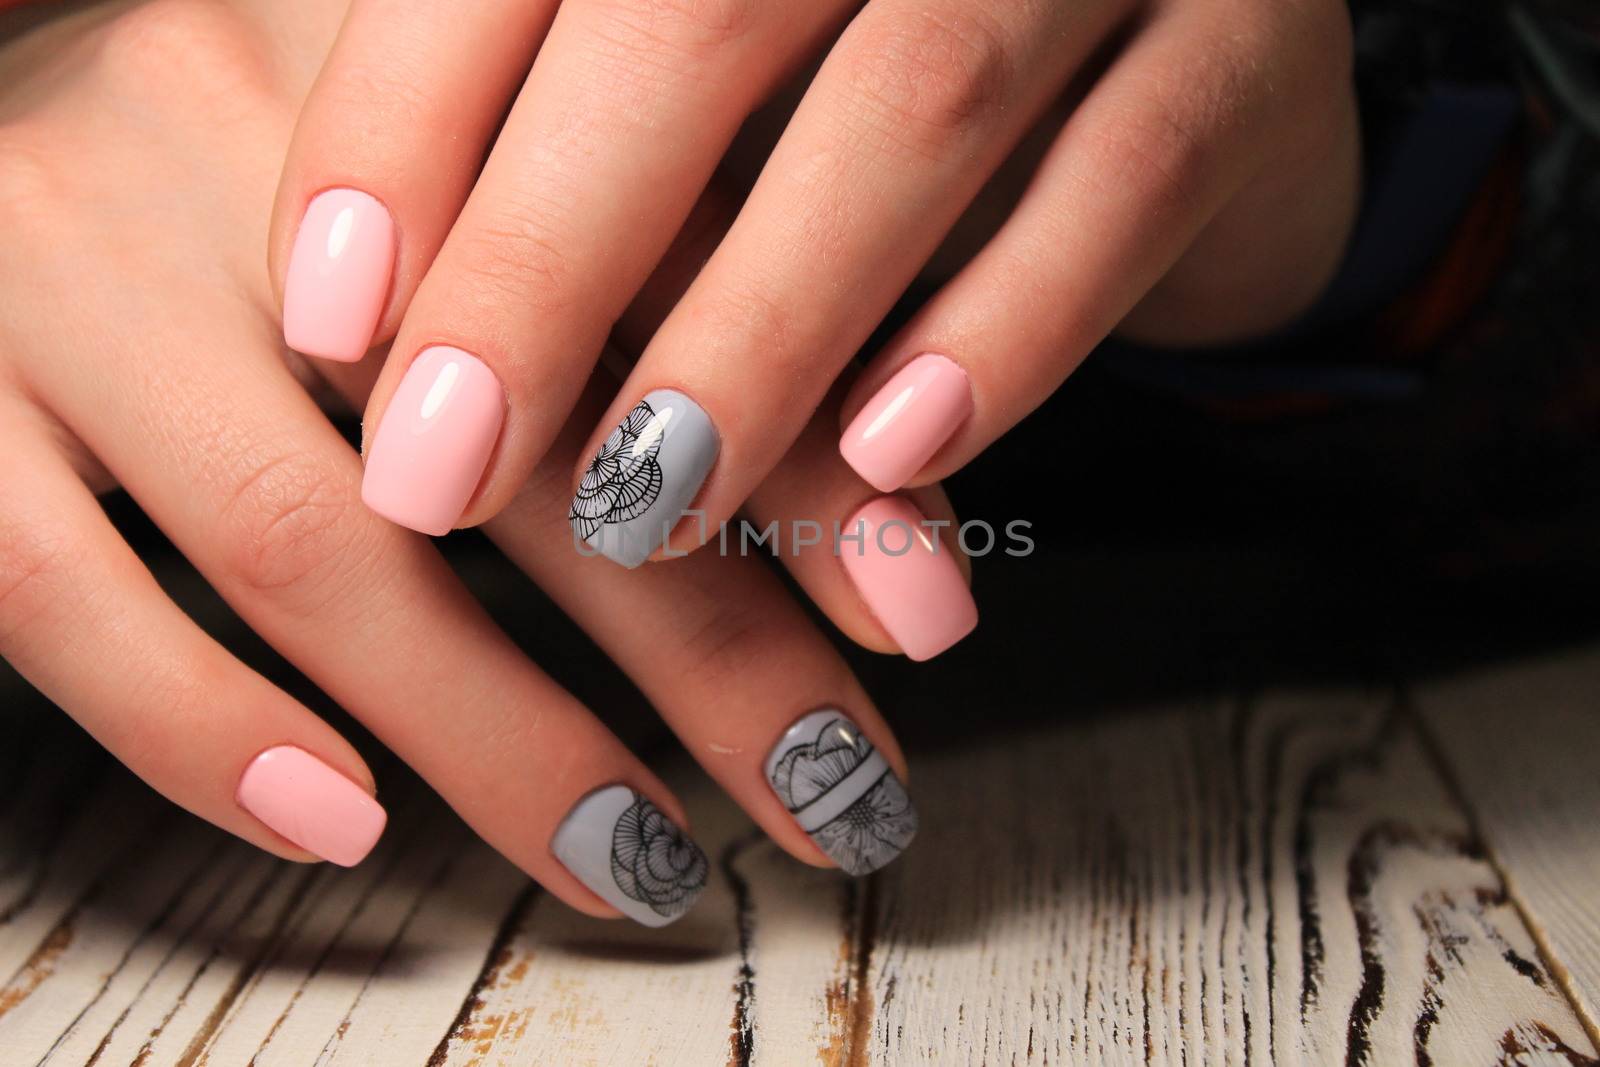 Fashionable design of manicure from beautiful